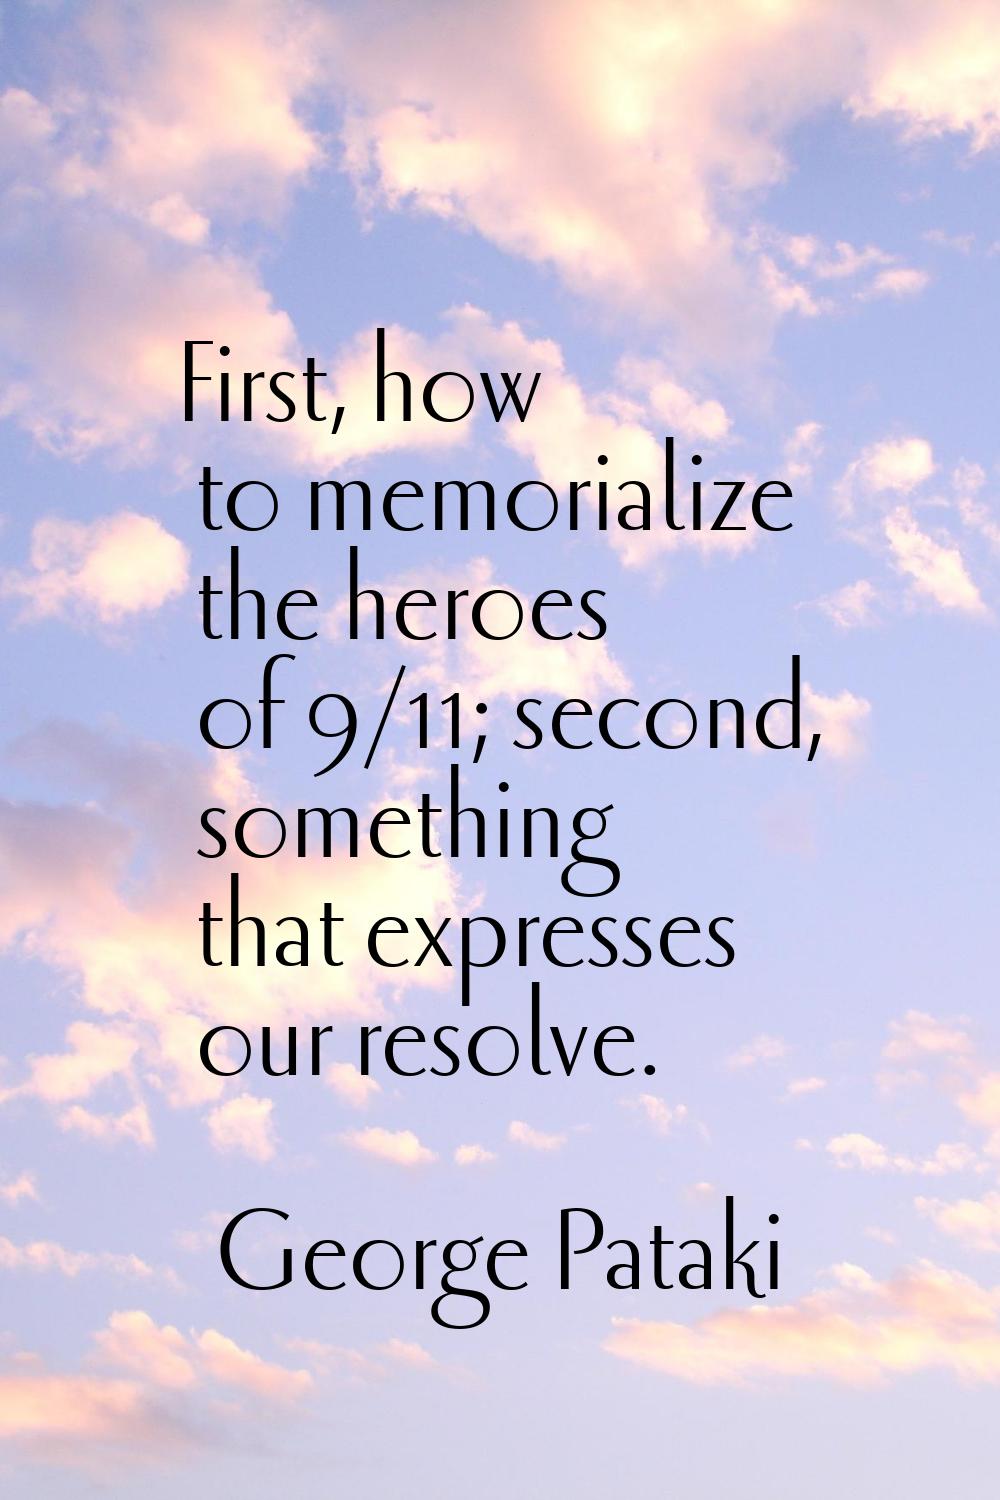 First, how to memorialize the heroes of 9/11; second, something that expresses our resolve.